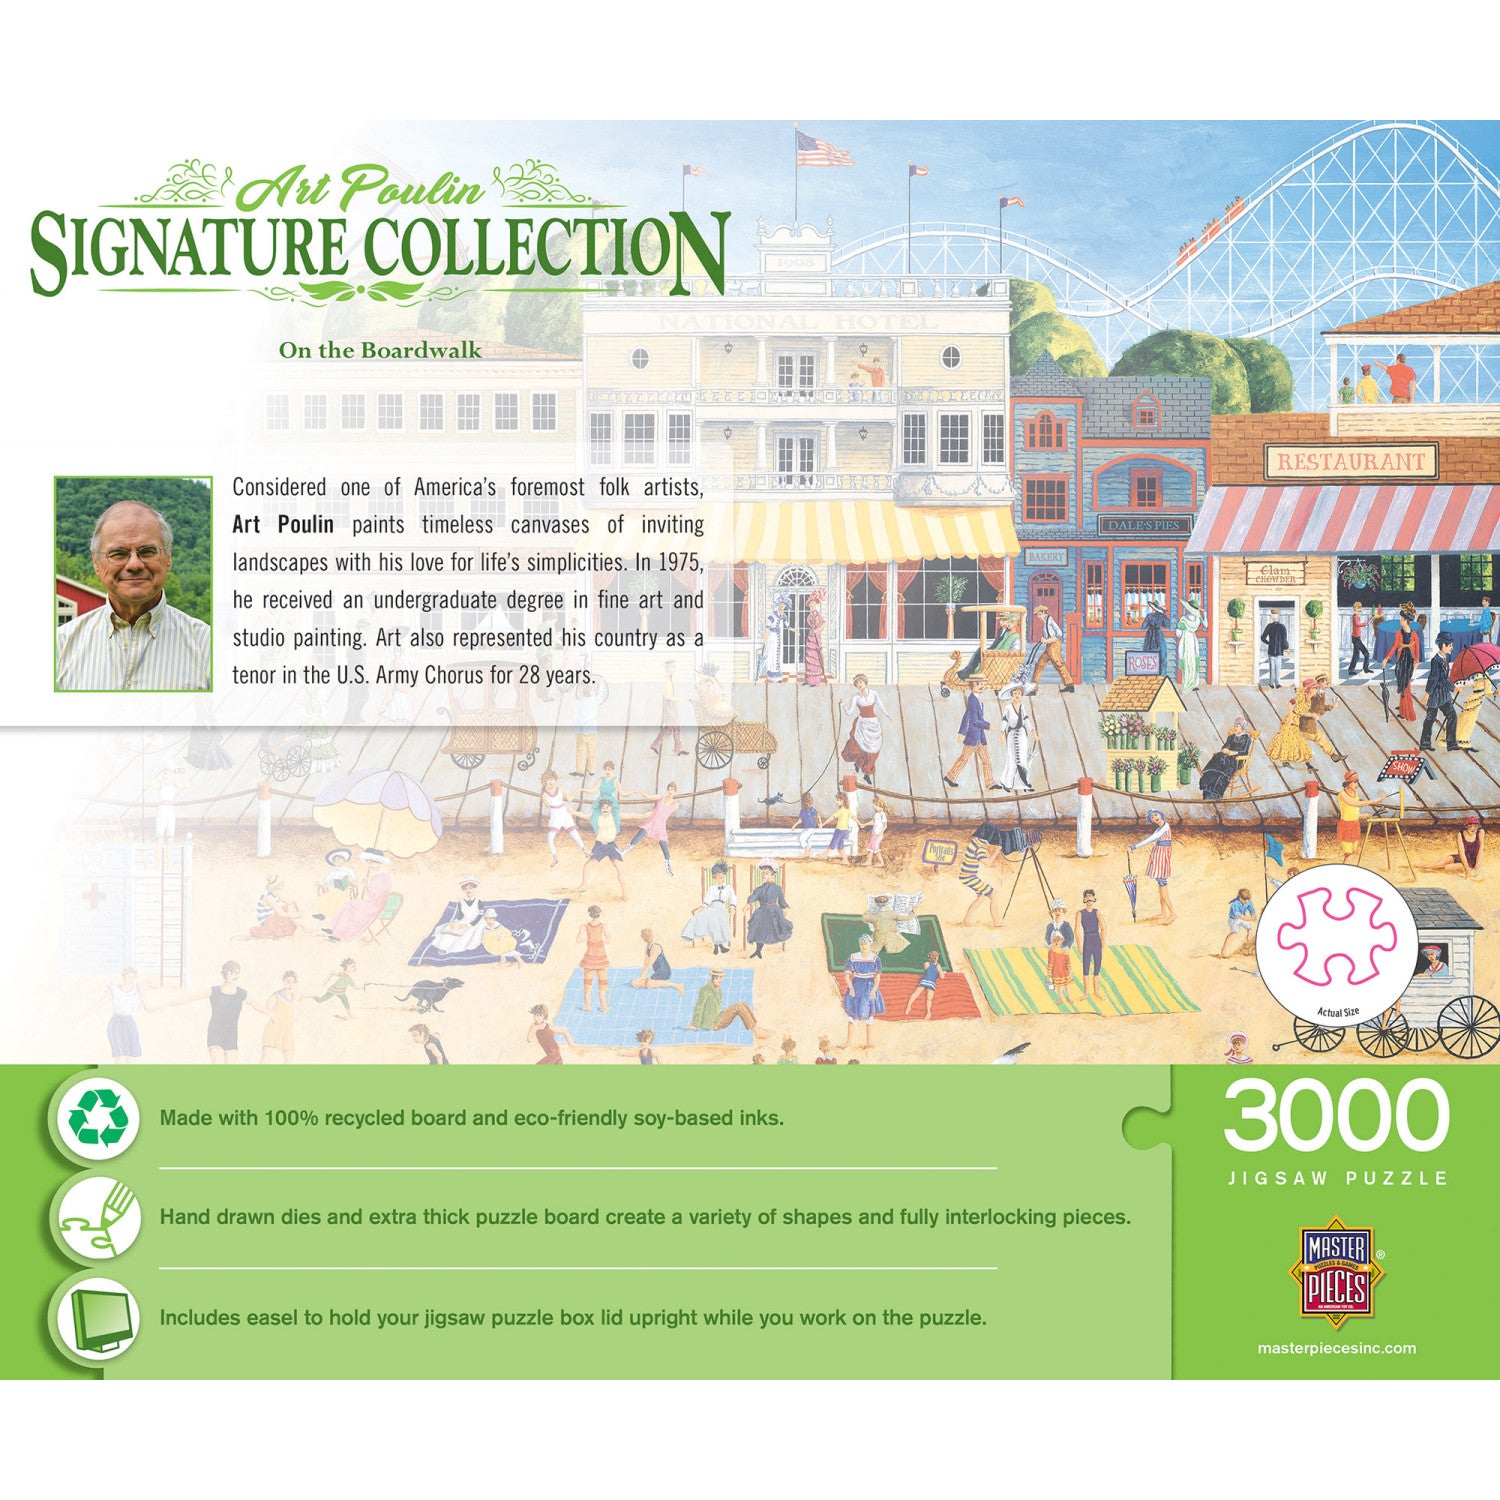 Signature Collection - On the Boardwalk 3000 Piece Jigsaw Puzzle - Flawed